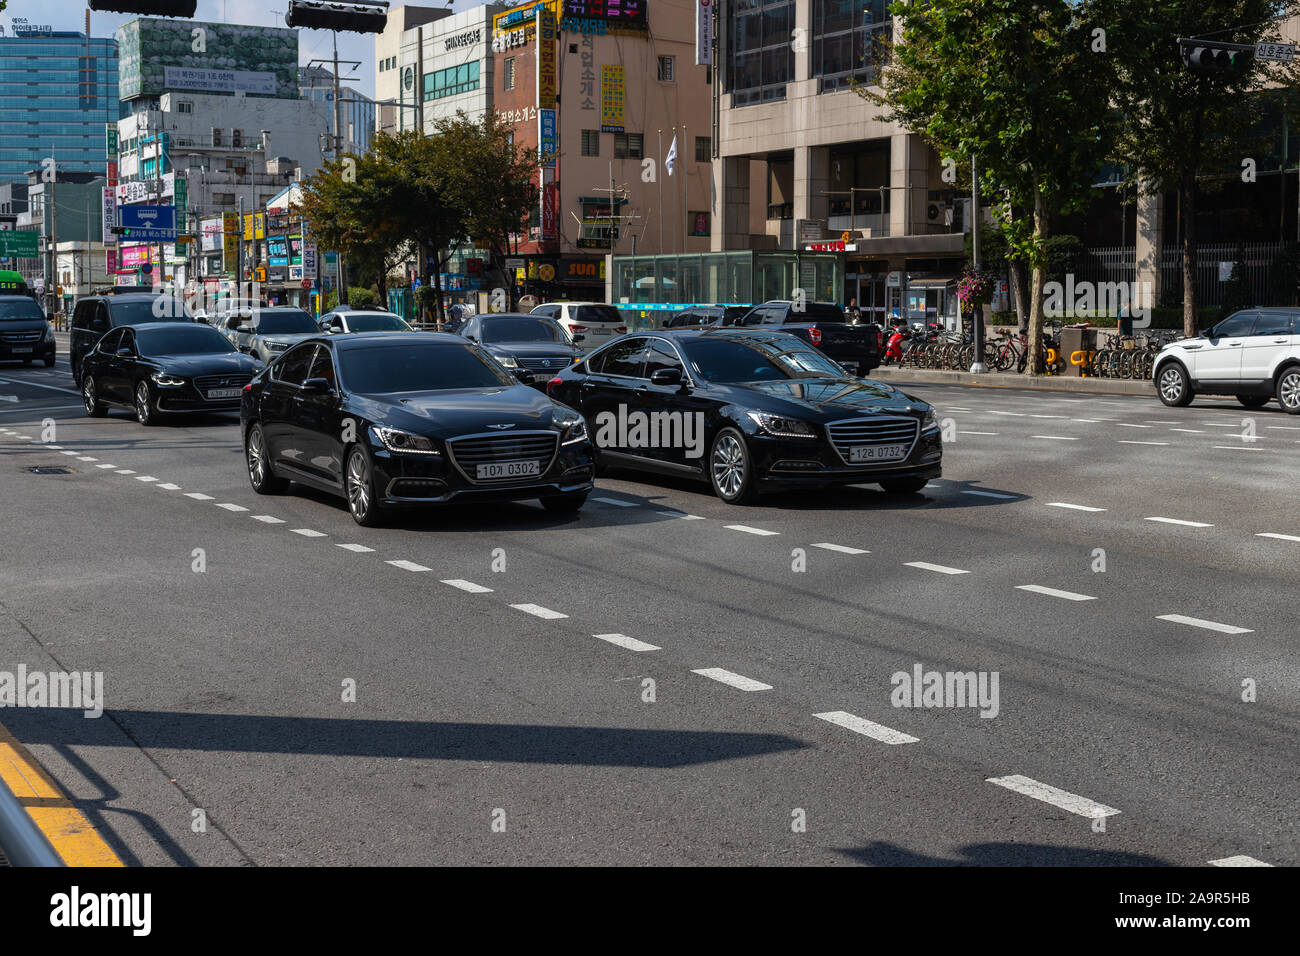 Seoul, South Korea - October 19, 2019: Luxury south korean cars. Busy intersection in the Yeongdeungpo area. Stock Photo